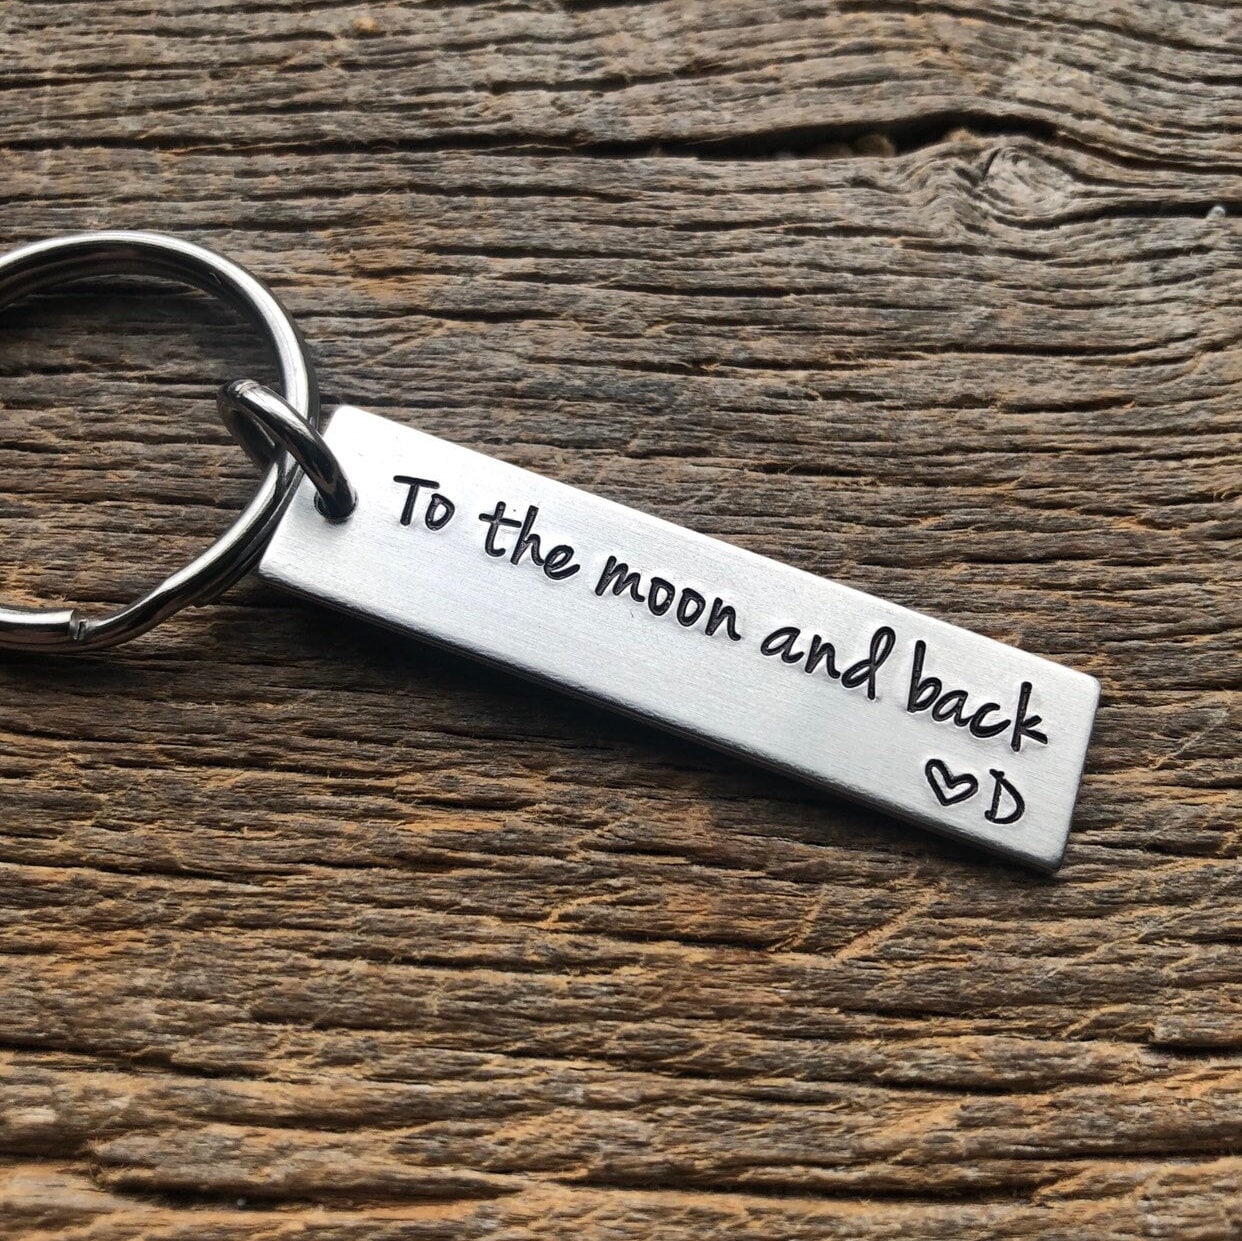 Wrapsify Vintage Moon Keychain - My Viking Queen - I Love You to The Moon and Back - Gkcb13006 Silver